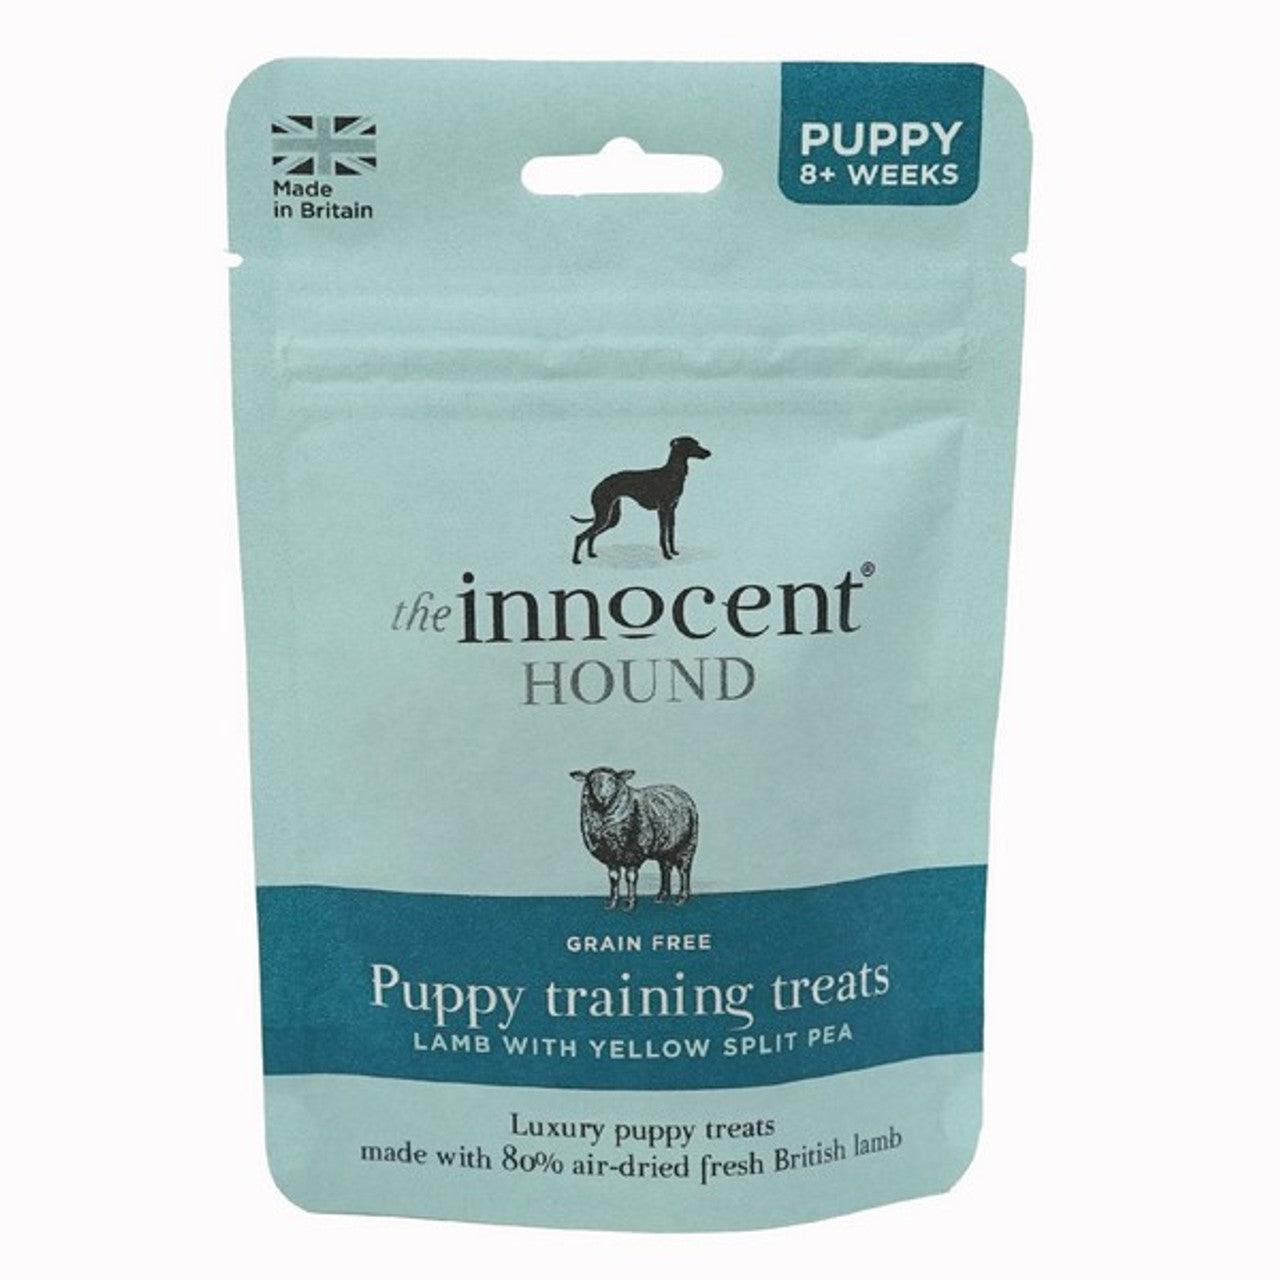 The Innocent Hound Puppy Training Treats 10 x 70g - North East Pet Shop The Innocent